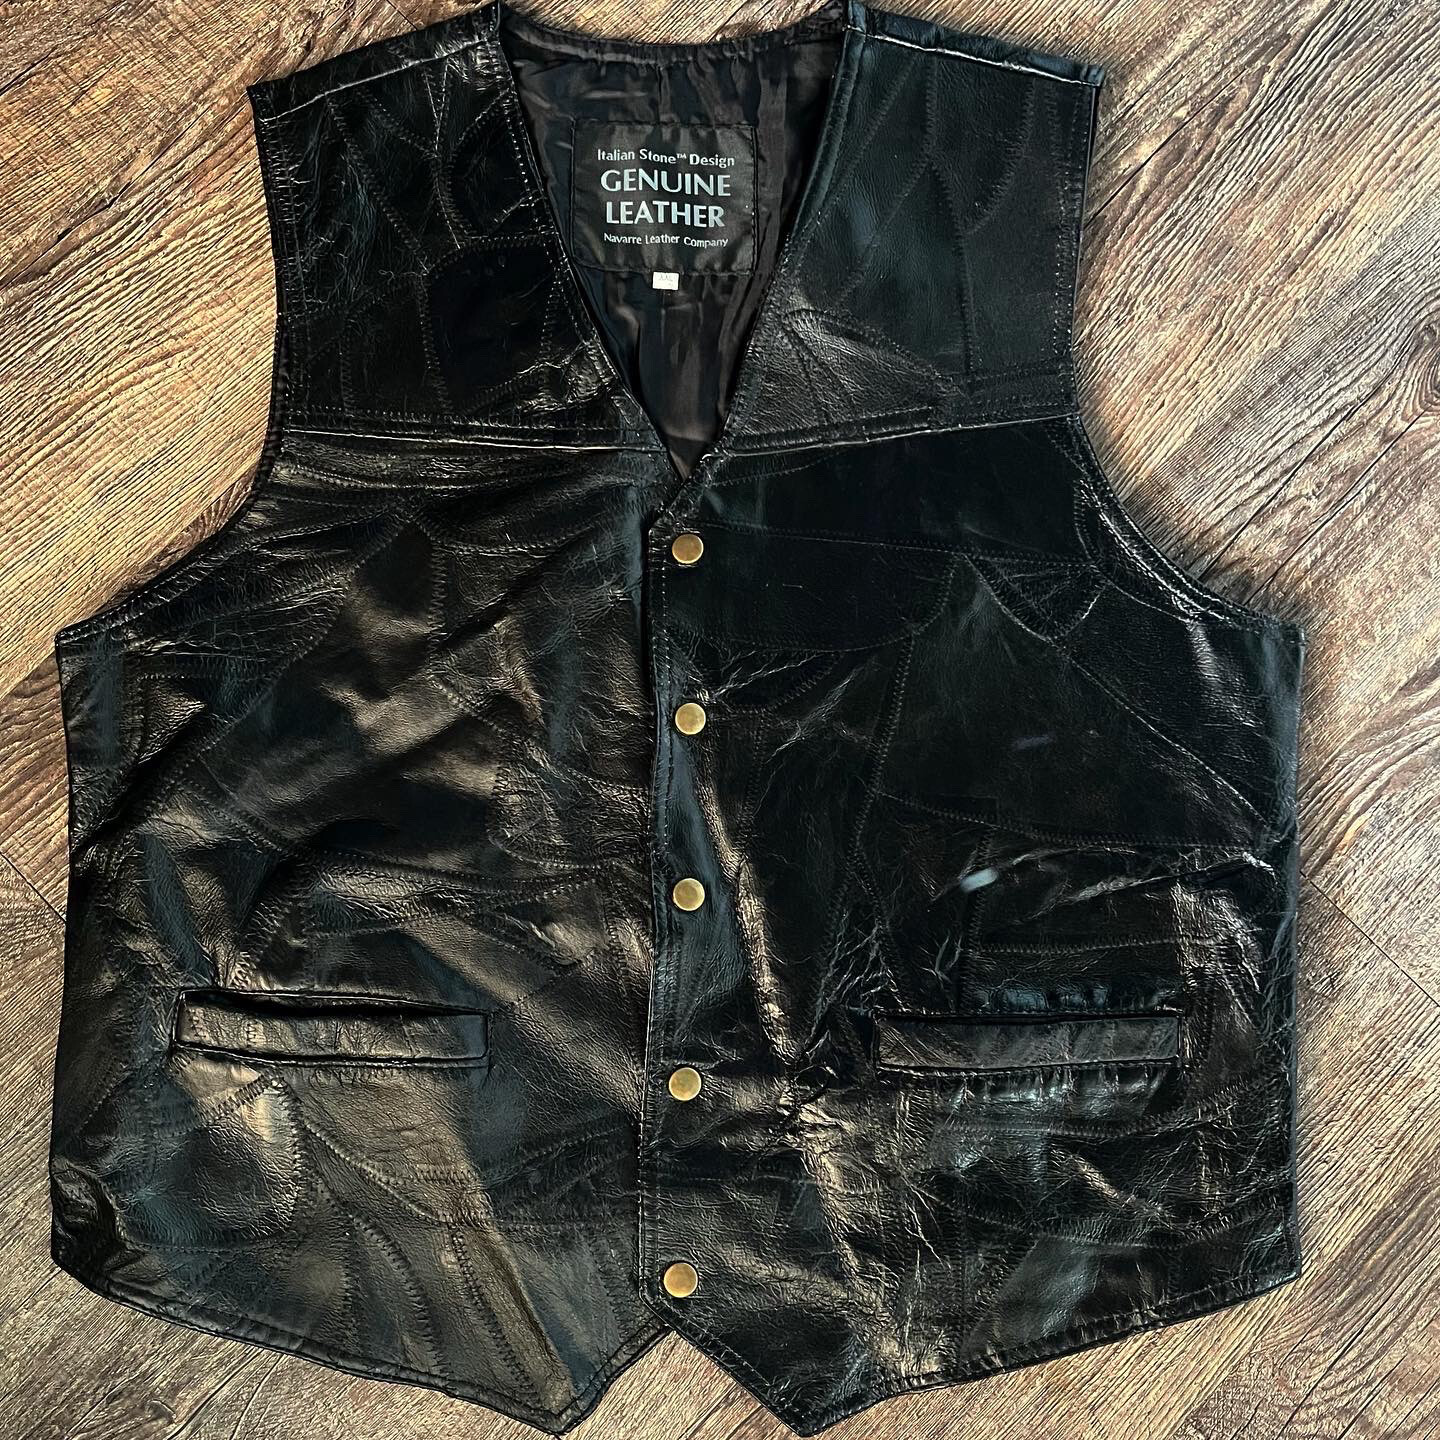 Vintage 1980s Leather Vest. Free Shipping